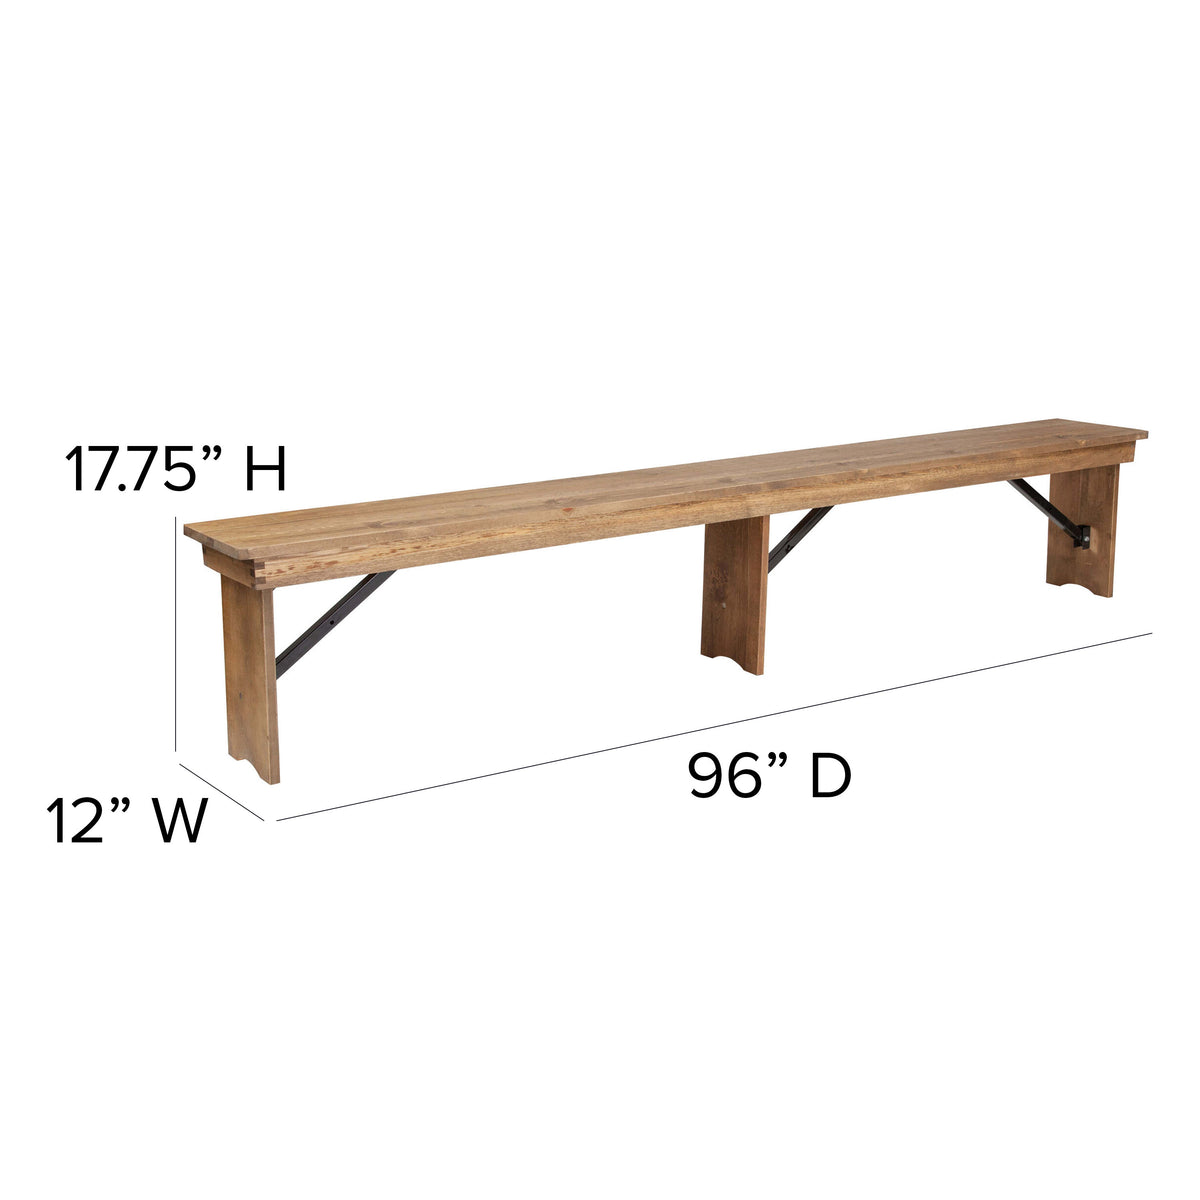 Antique Rustic |#| 8' x 40inch Antique Rustic Folding Farm Table and Four Bench Set